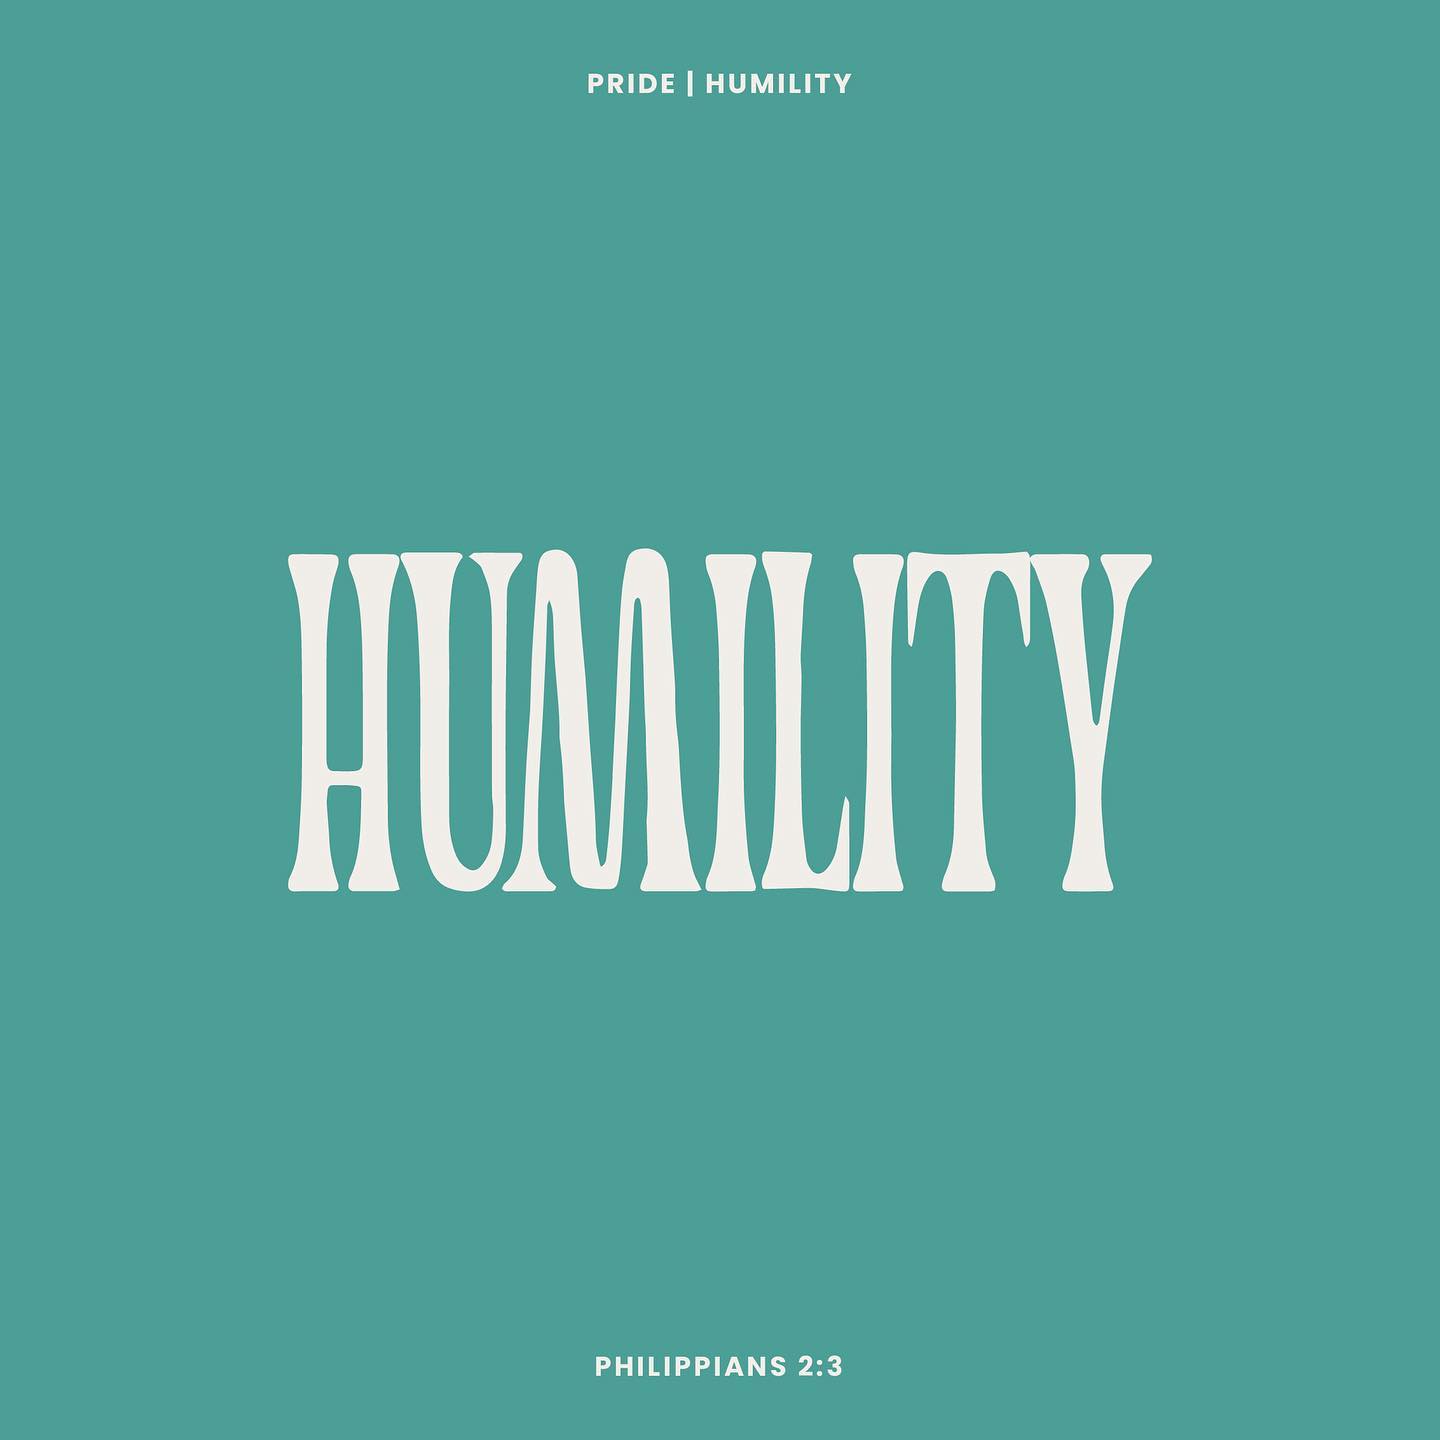 Philippians 2:3 "What's the Value?" (Pride & Humility - Week 2)